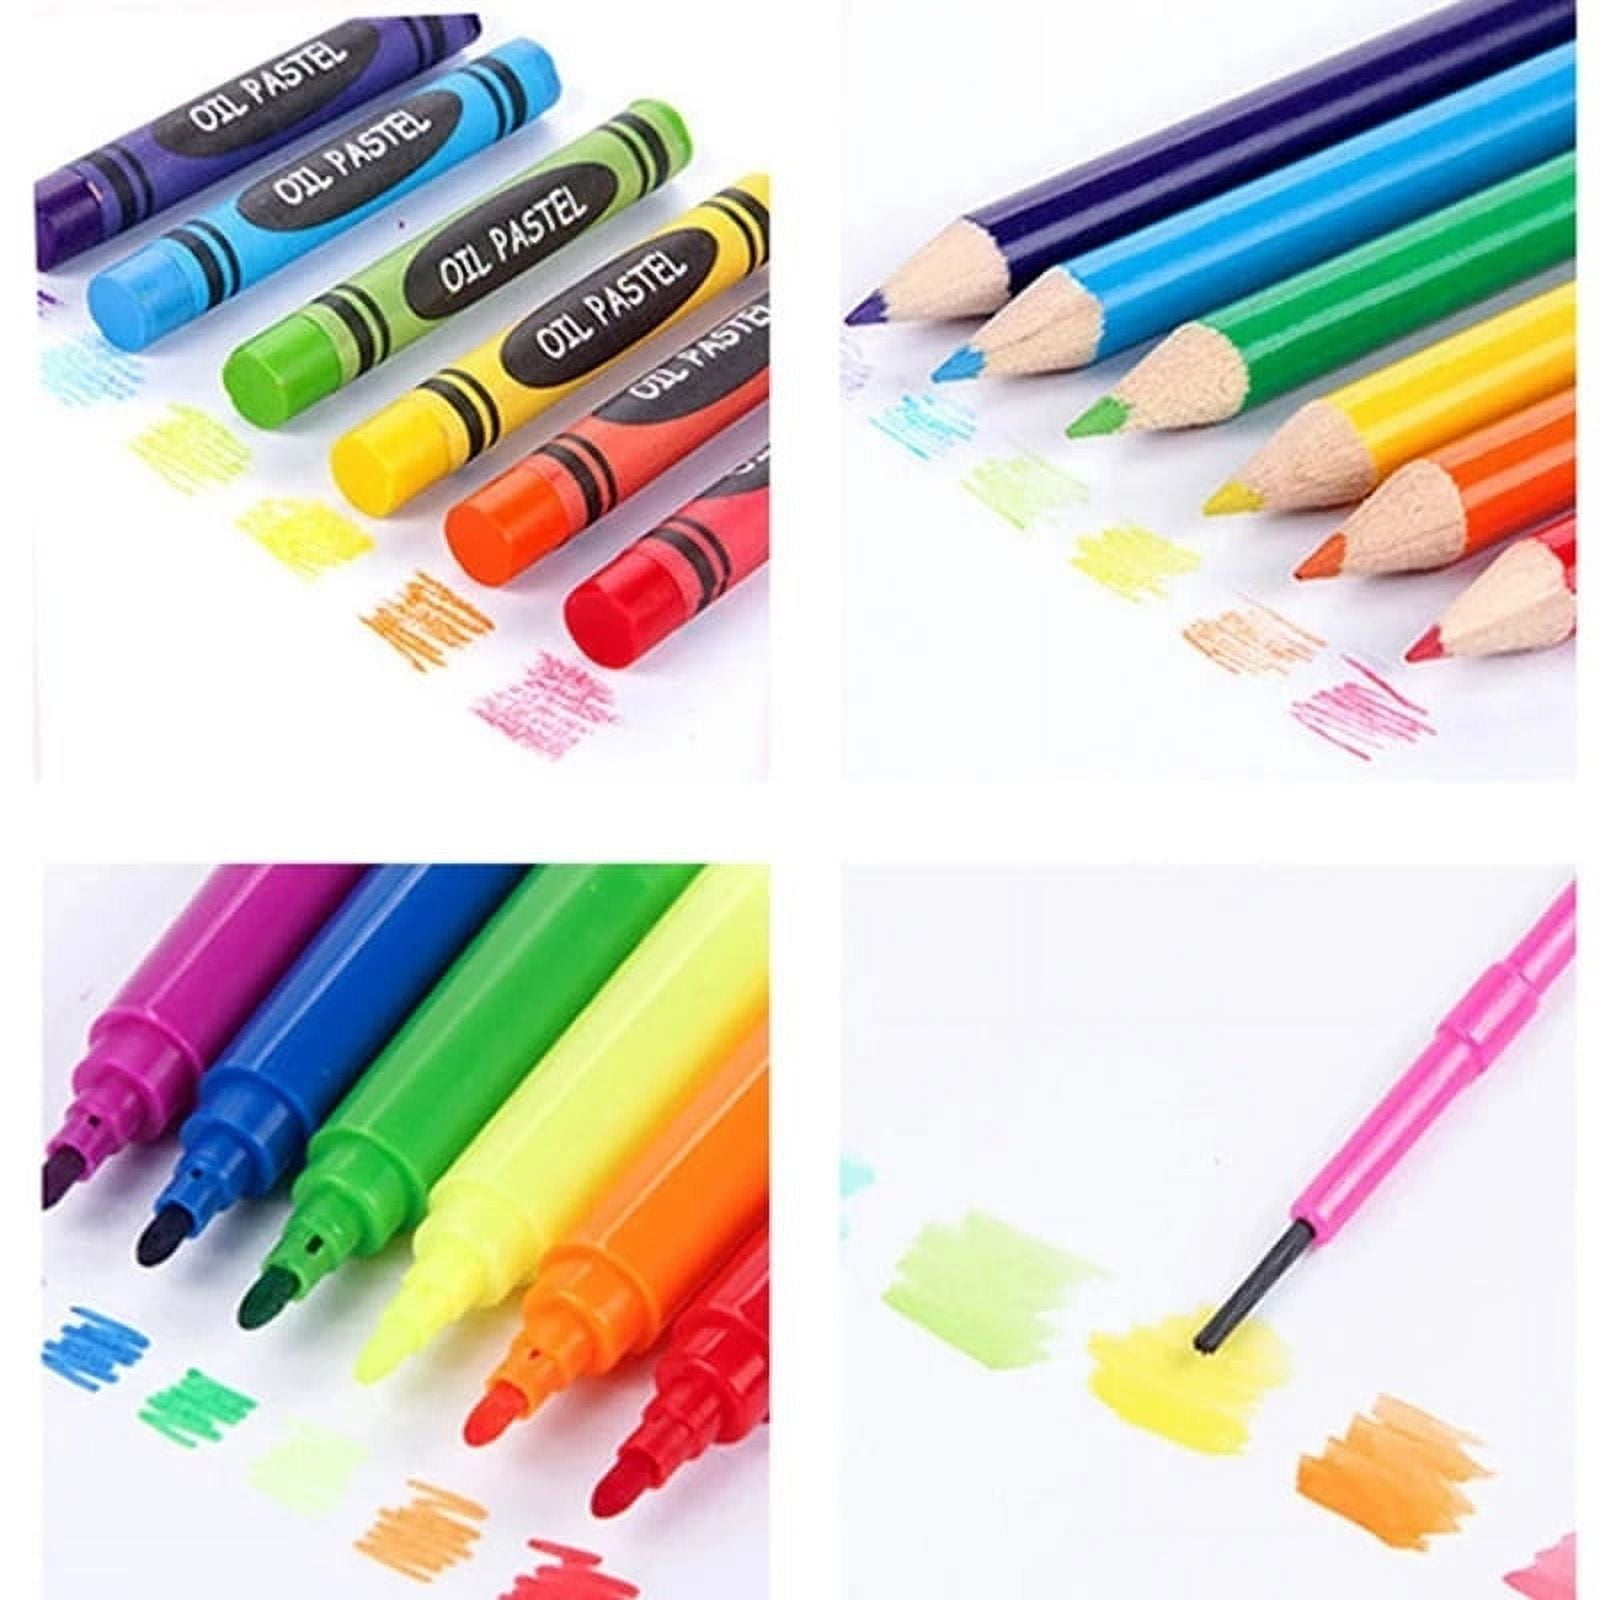 180pcs Painting Kits Oil Painting Sticks, Watercolor Pens, Crayons, Colored  Pencils, Paperclips, Palette, Pencil Sharpener, Glue, Eraser, Portable Art  Supplies For Kids, Teens And Adults, Don't Miss These Great Deals